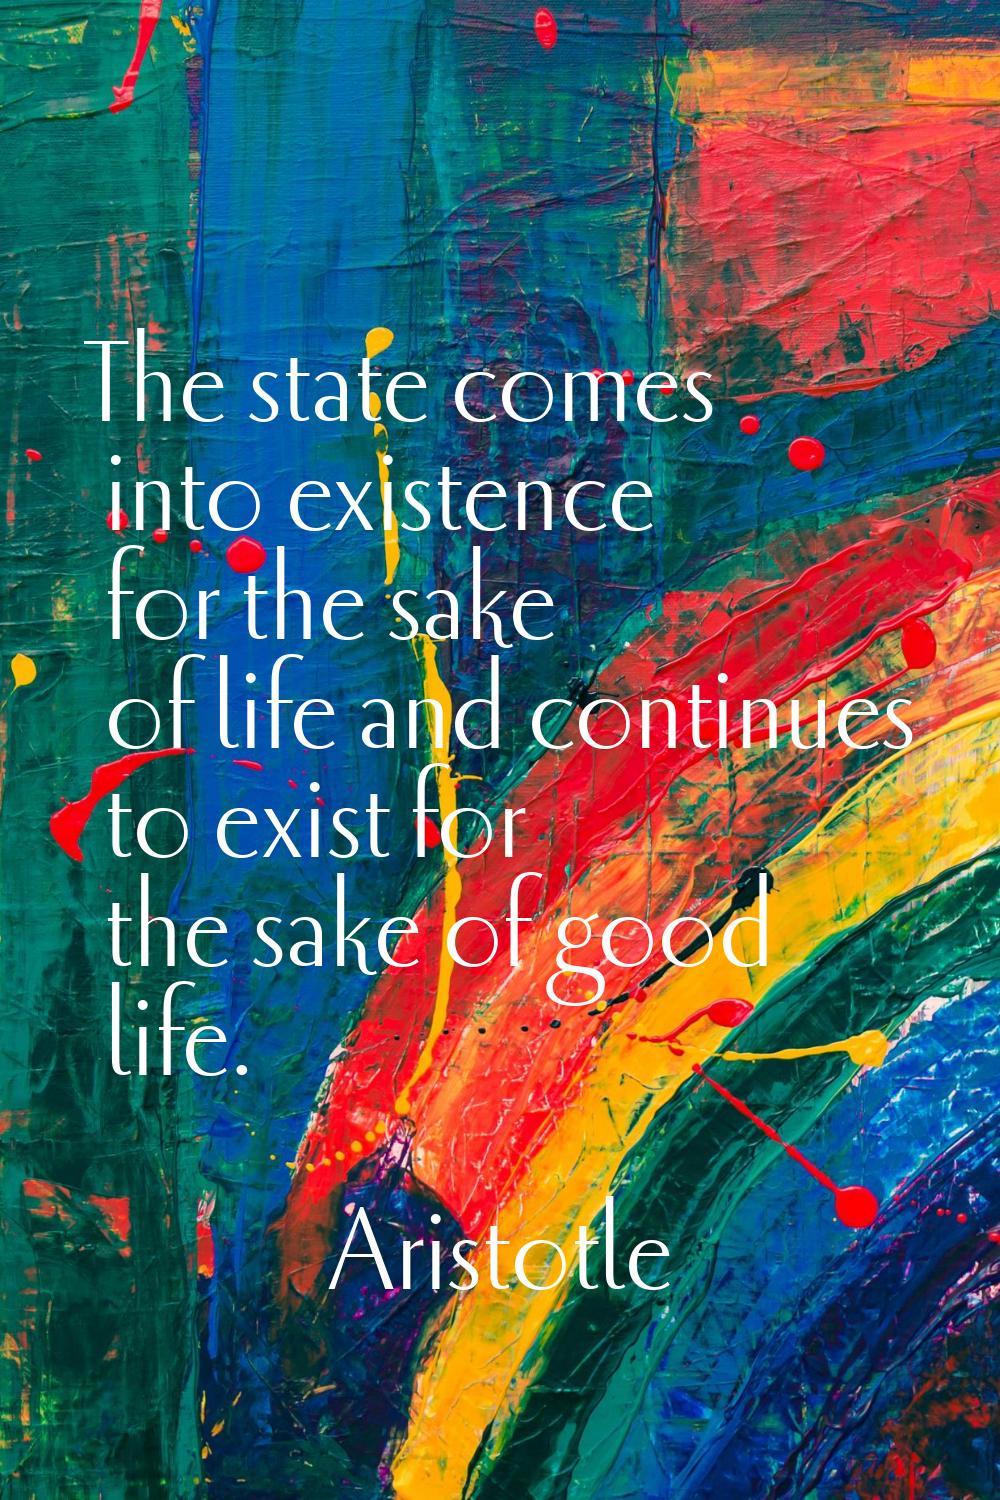 The state comes into existence for the sake of life and continues to exist for the sake of good lif